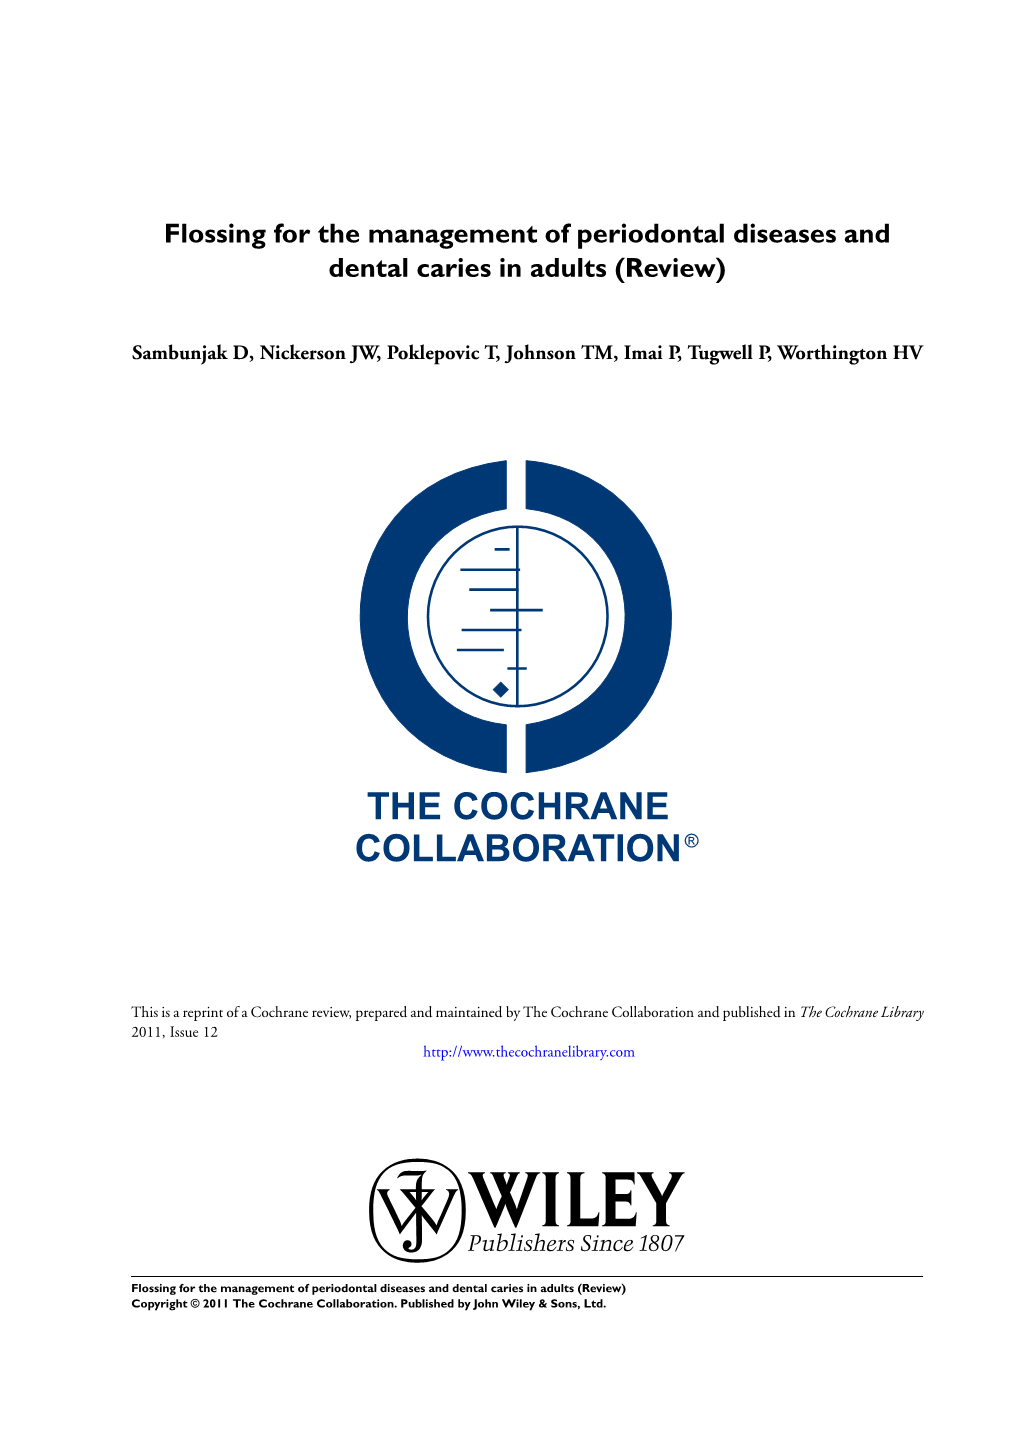 Flossing for the Management of Periodontal Diseases and Dental Caries in Adults (Review)